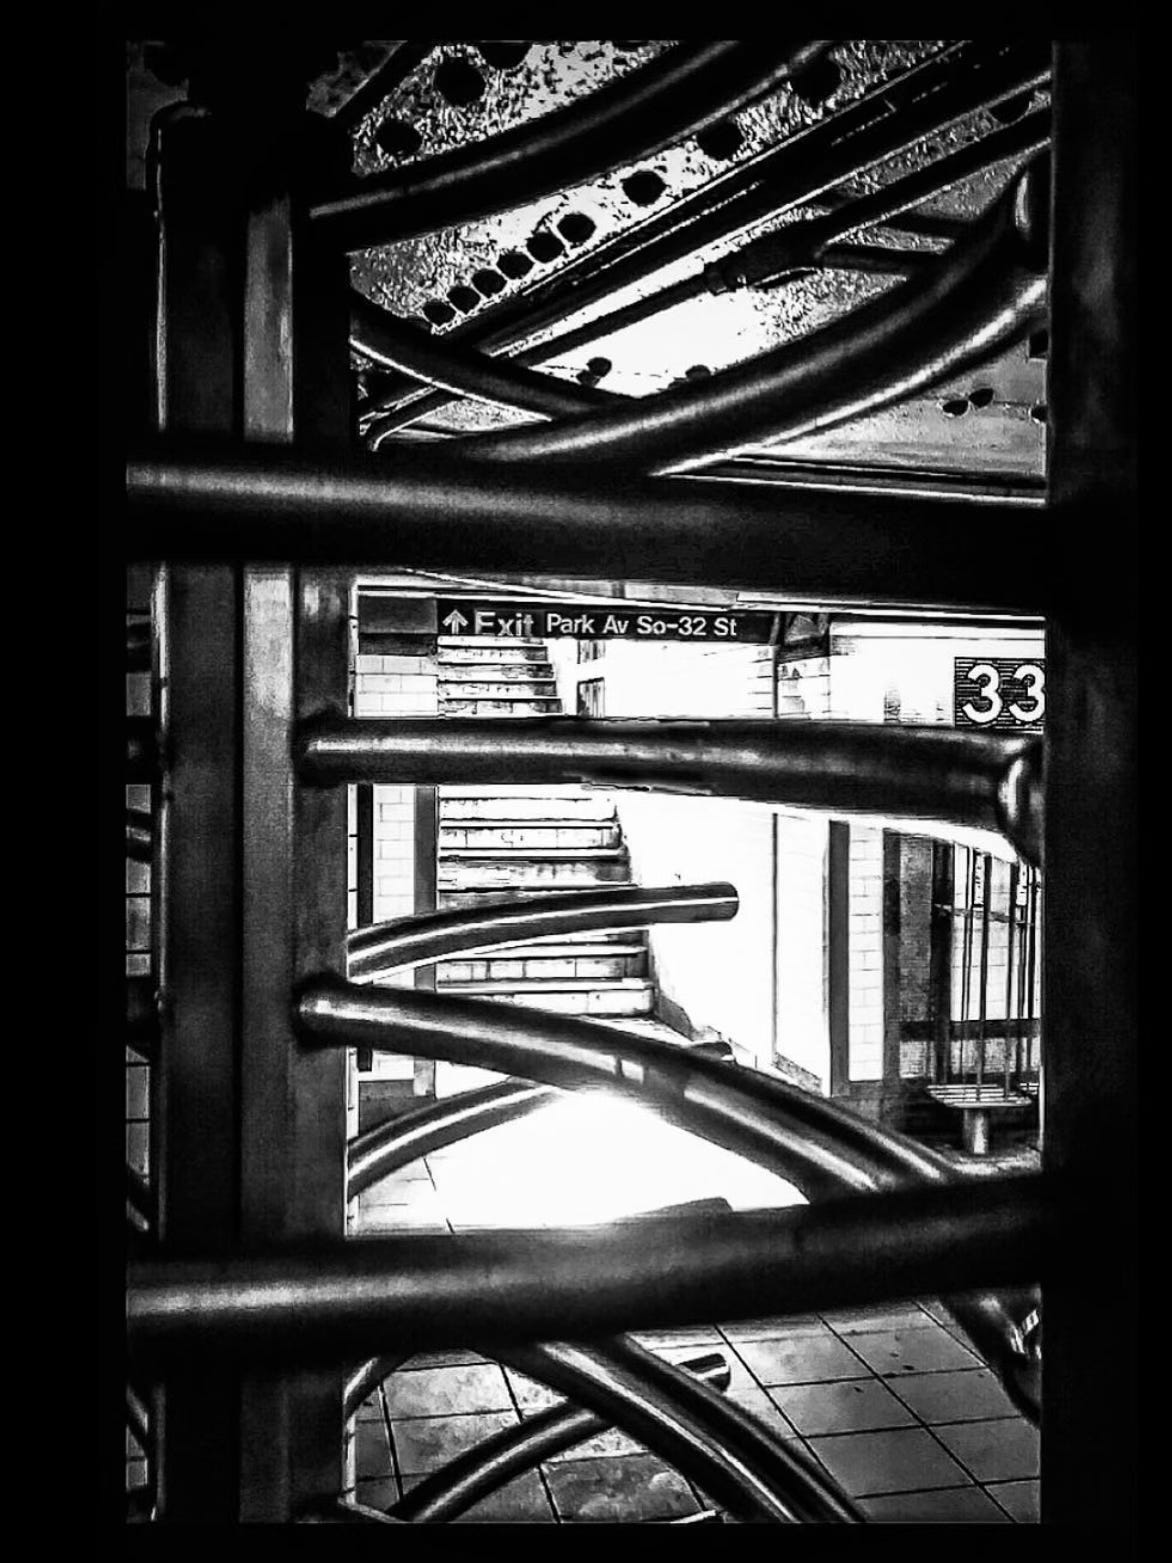 A noir-style black and white photograph of the New York subway, as seen through one of the vertical turnstile entrances. In the foreground, the curving bars of the turnstile make dramatic gestures across the image. Through the bars you can see a stairway with the words “Exit Park Av So-32 St” and on a wall to the right a tile mosaic with the number 33. 